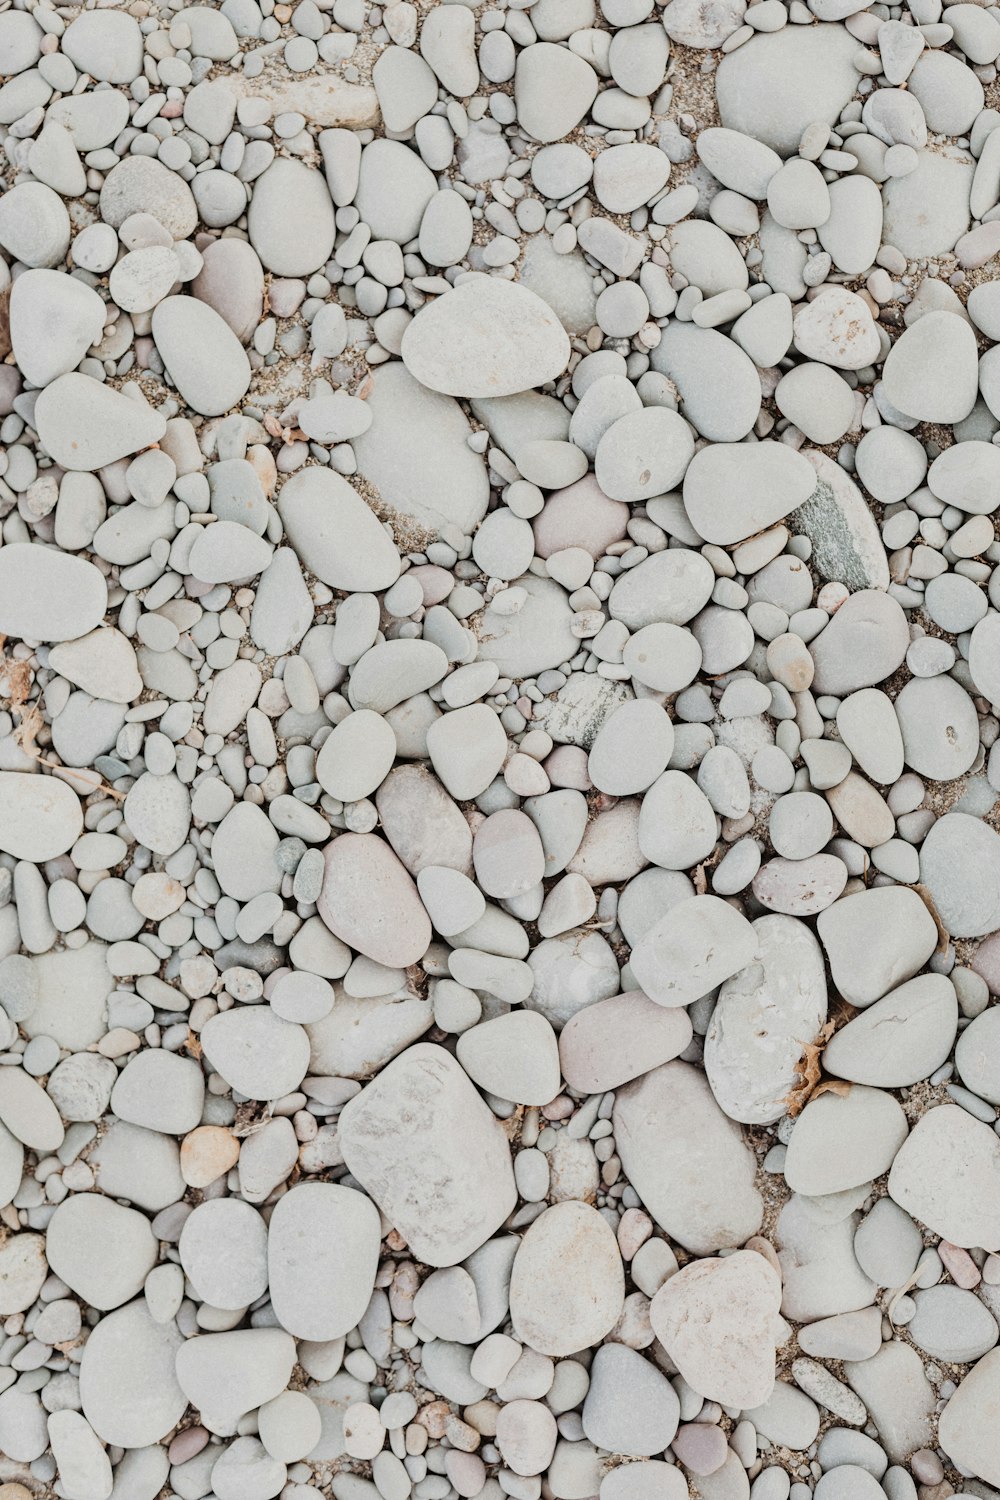 white and gray stones on brown soil